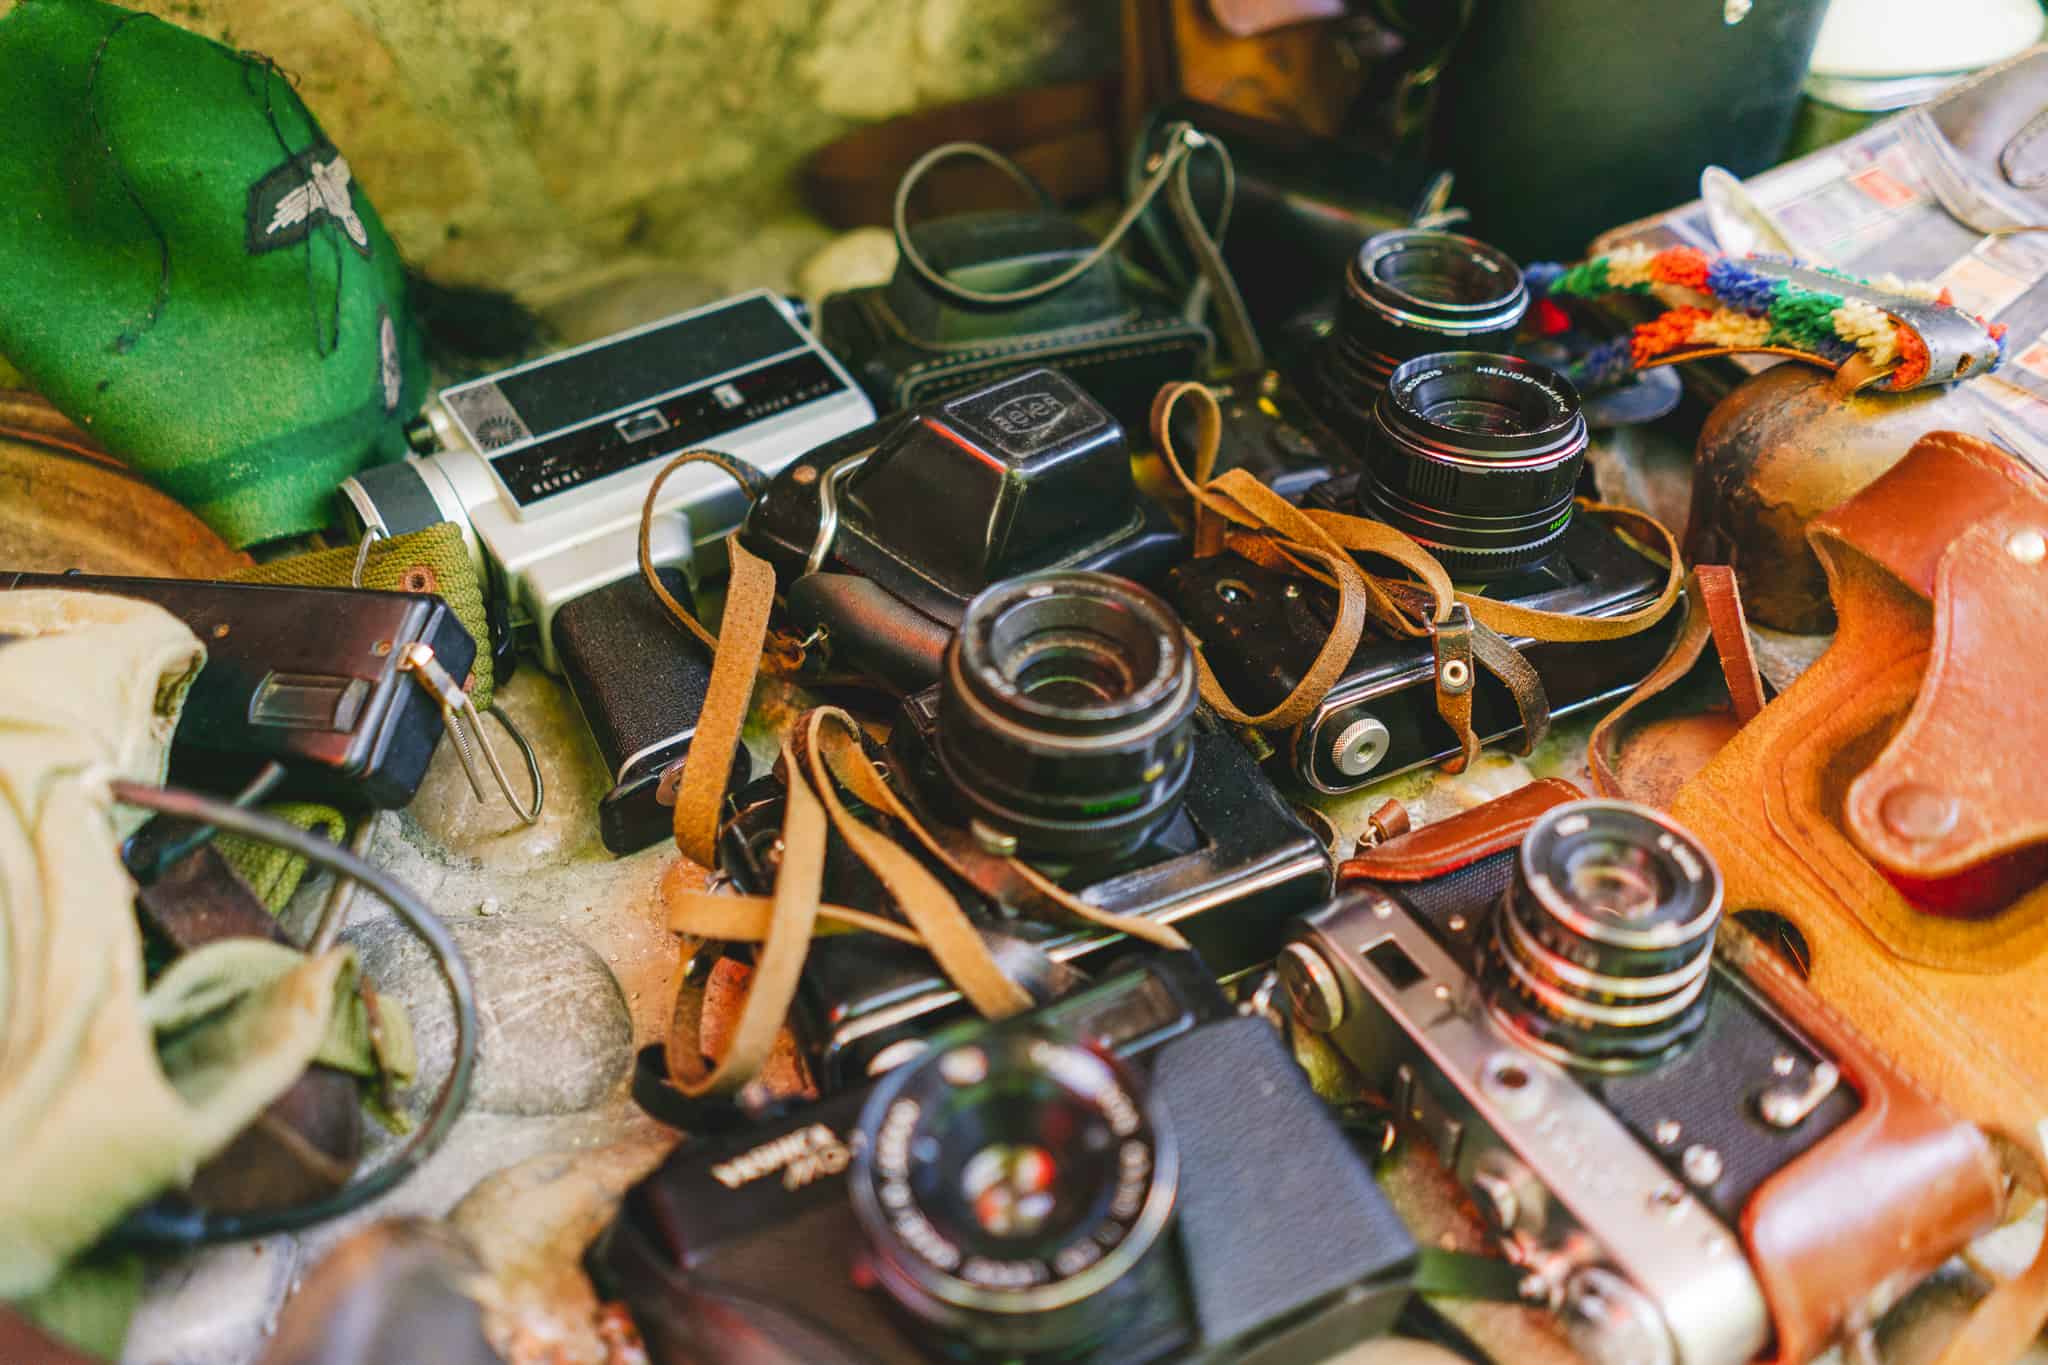 A saturated photo of old vintage cameras lying on stones